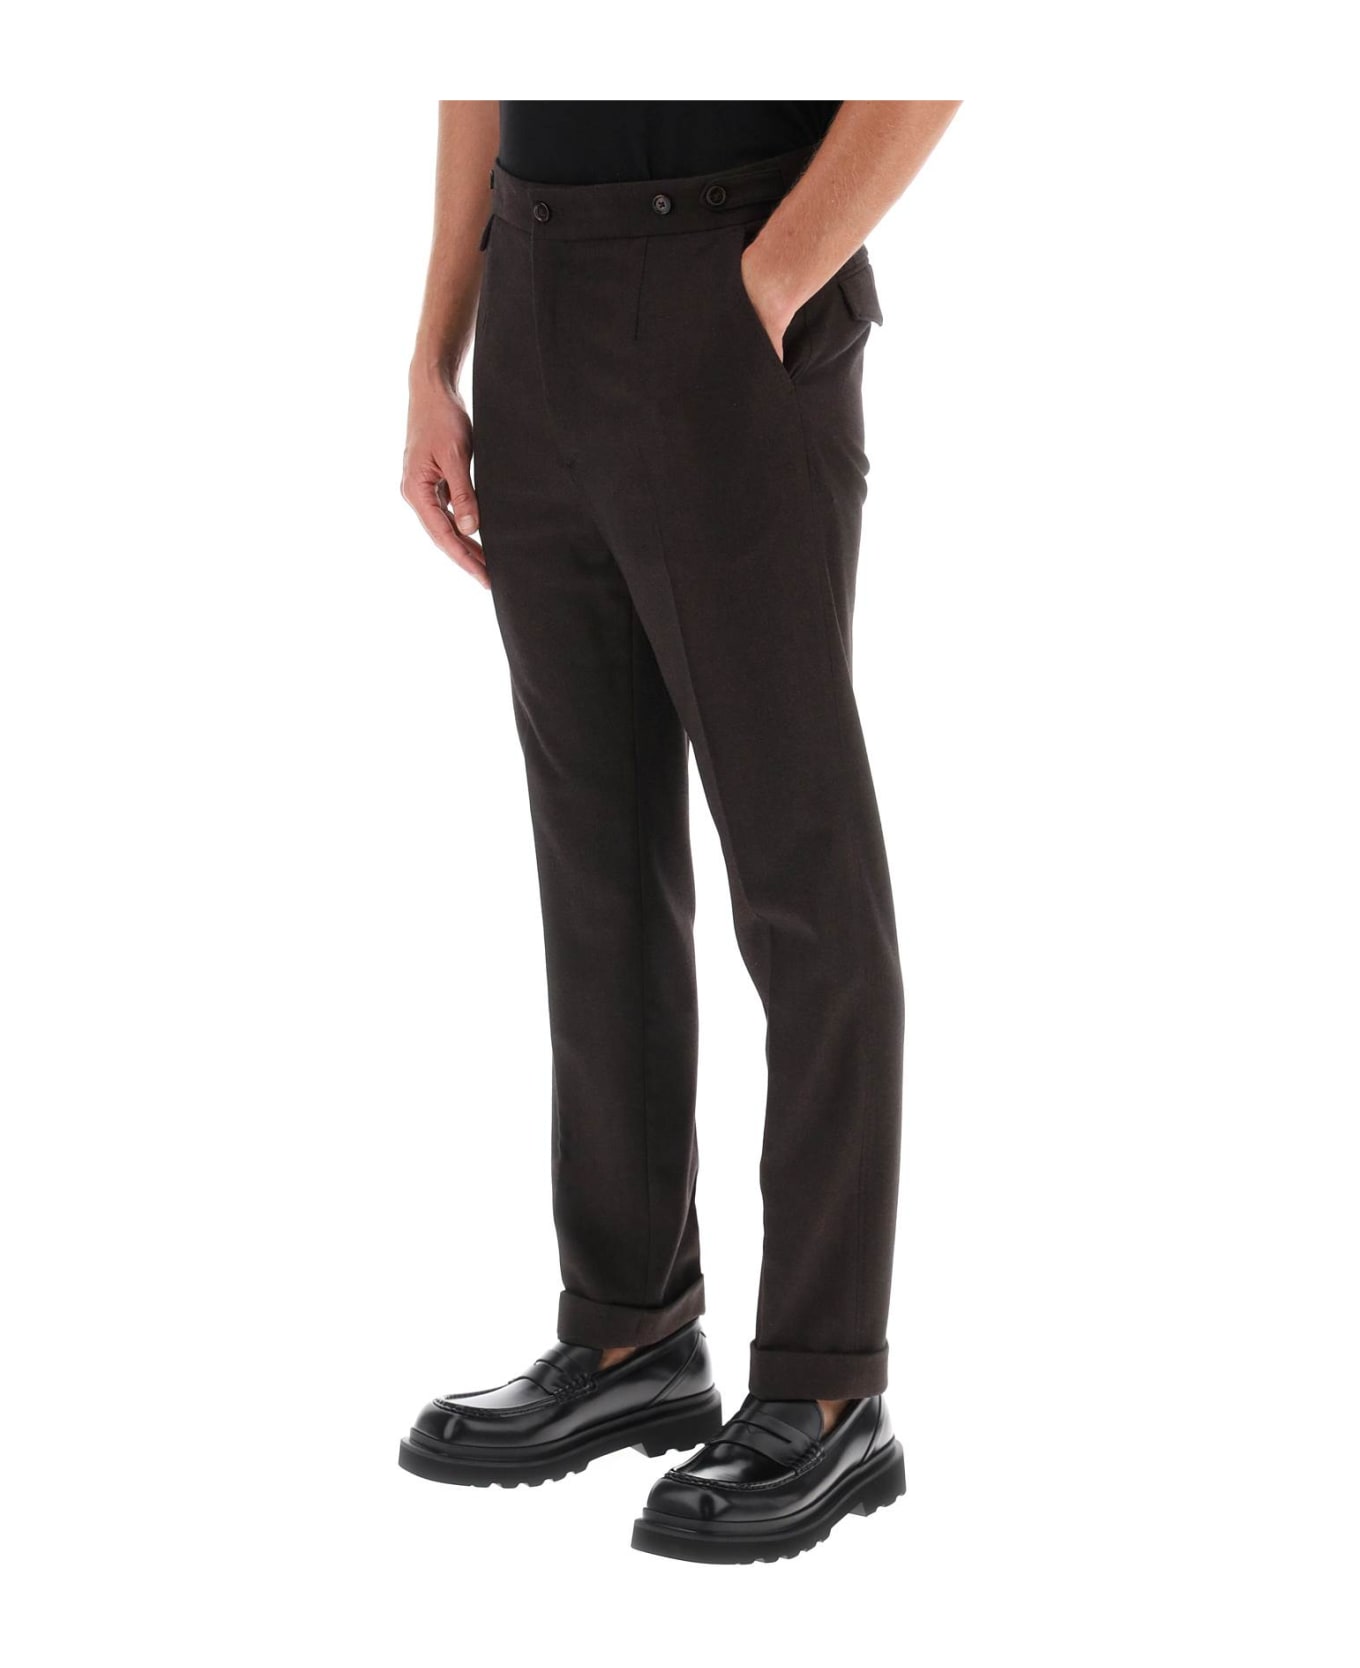 Dolce & Gabbana Re-edition Flannel Pants - MARRONE (Brown)